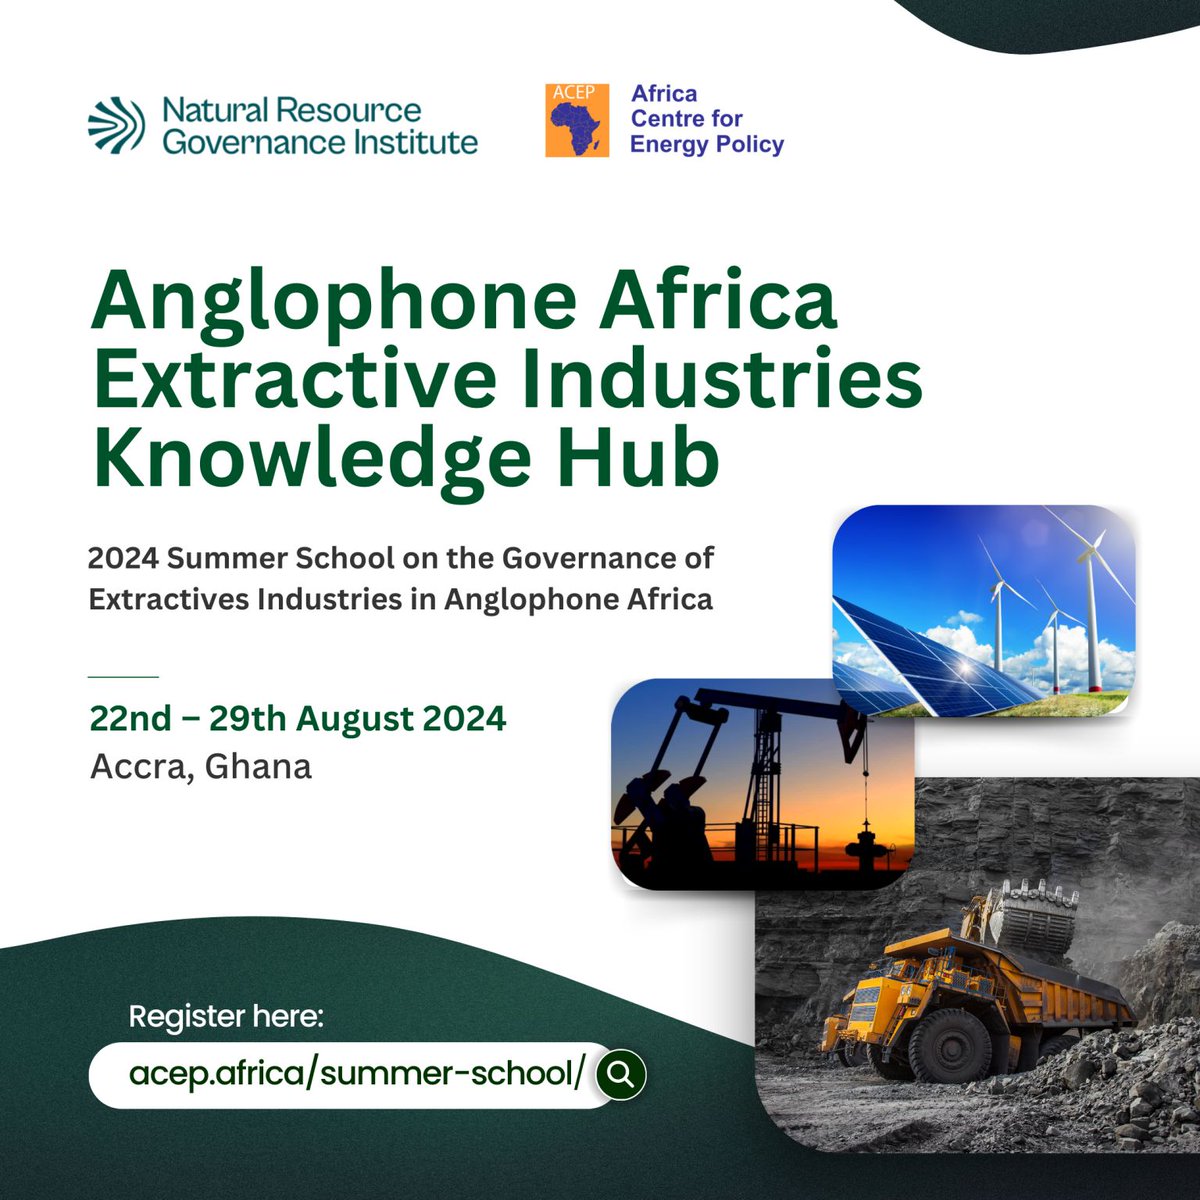 Ready to deepen your understanding of the energy transition and Africa's extractives industries? Join the 2024 summer school on the governance of extractives industries in Anglophone Africa, organized by @AcepPower & NRGI. Apply now ➡️ acep.africa/summer-school